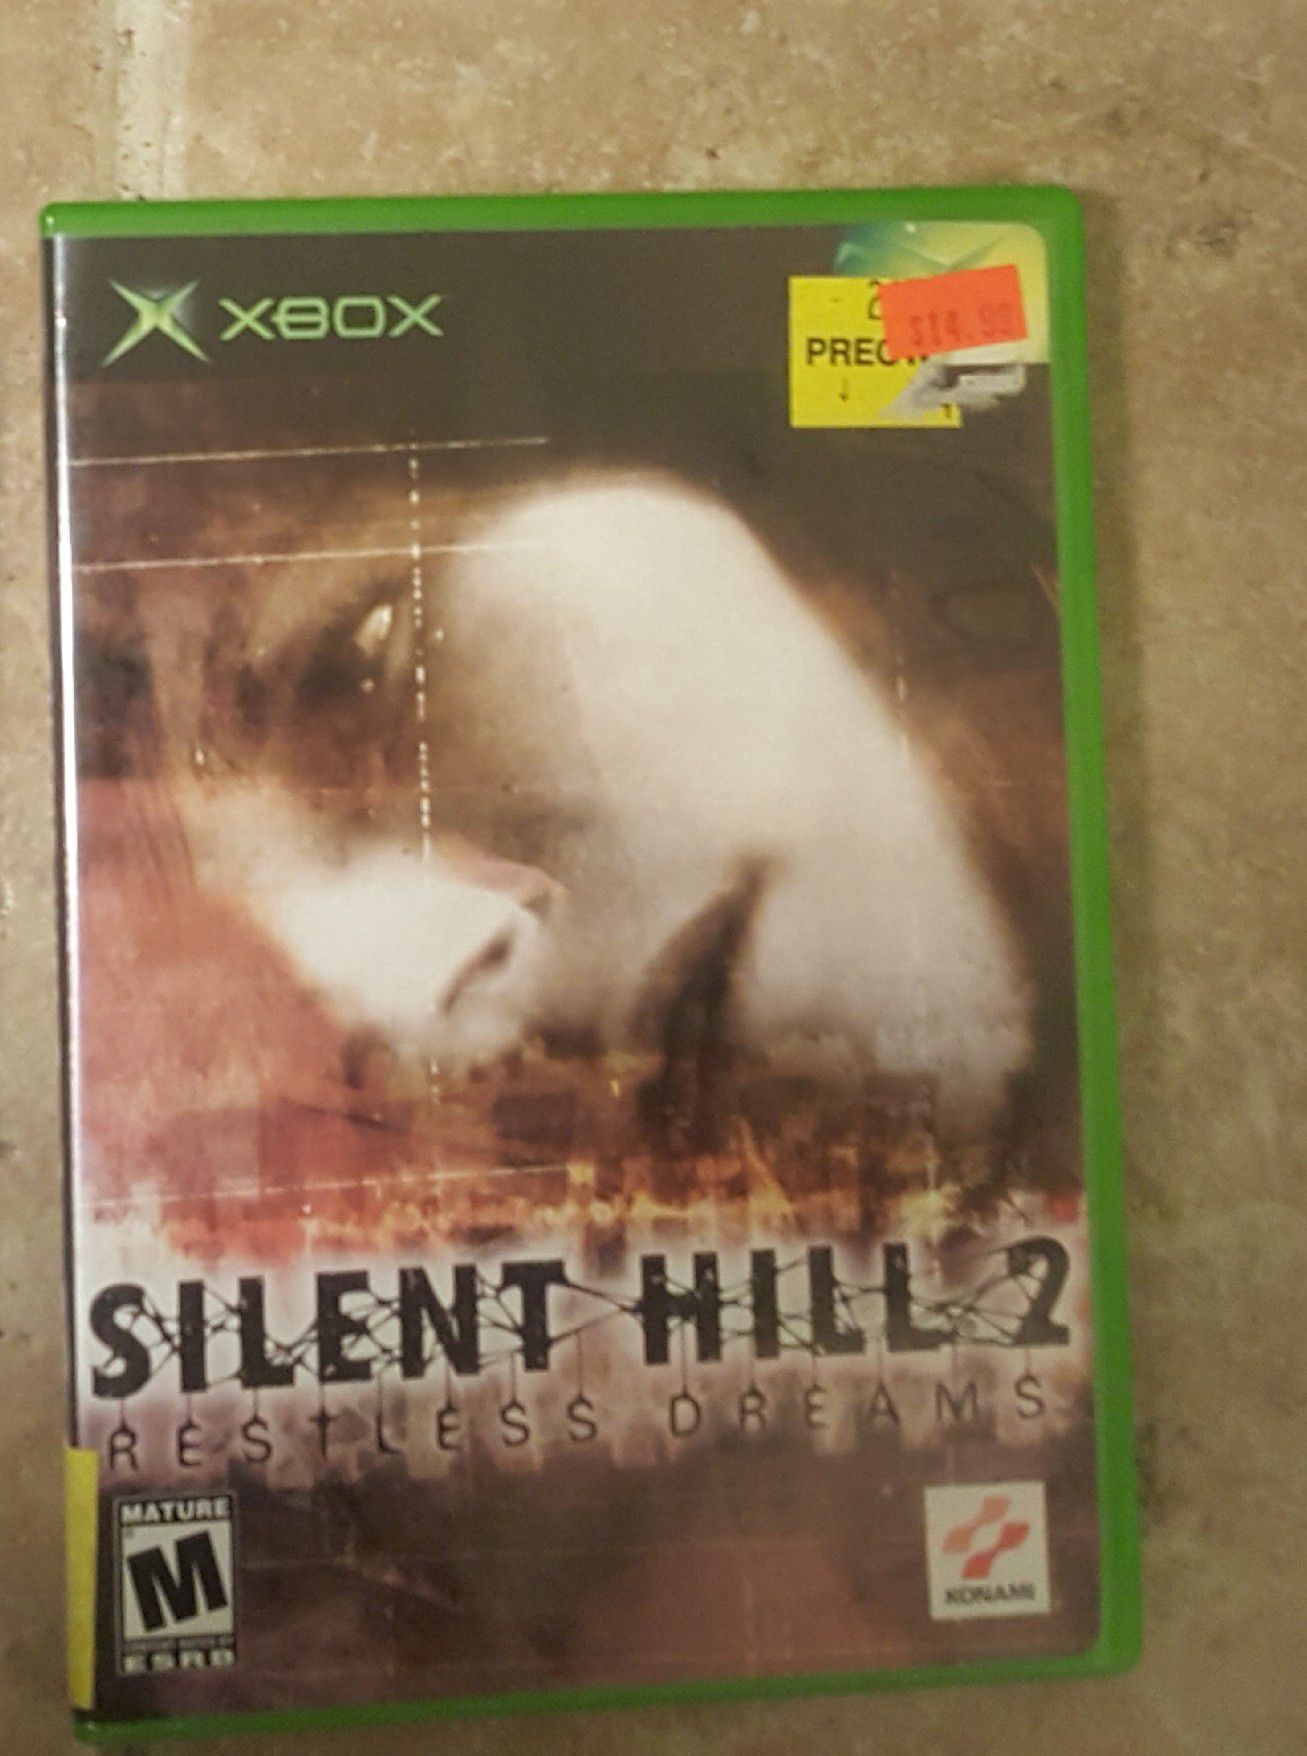 PS1 XBOX GAMES - SILENT HILL + SILENT HILL 2 + BLOODRAYNE 2